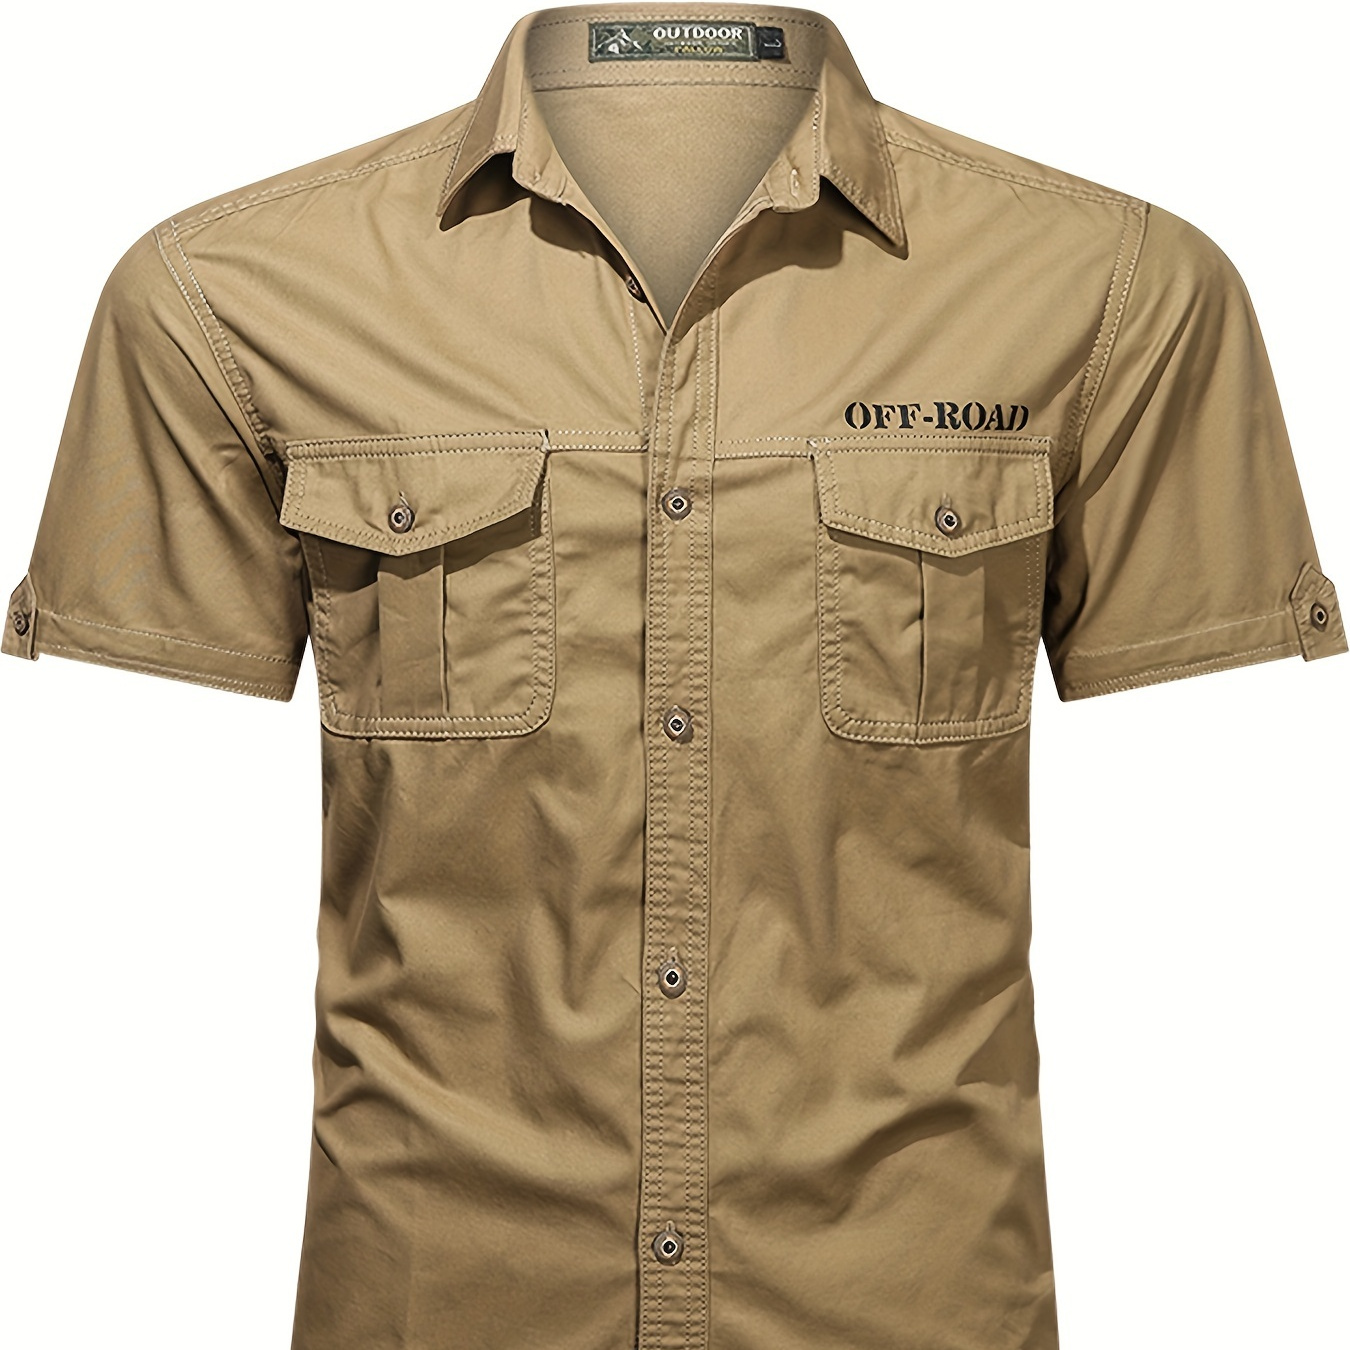 

Classic Design Men's Letter Print "off-road" Single-breasted Short Sleeve Lapel Cargo Shirt With Flap Pockets, Pure Cotton Tops For Summer Outdoors Activities